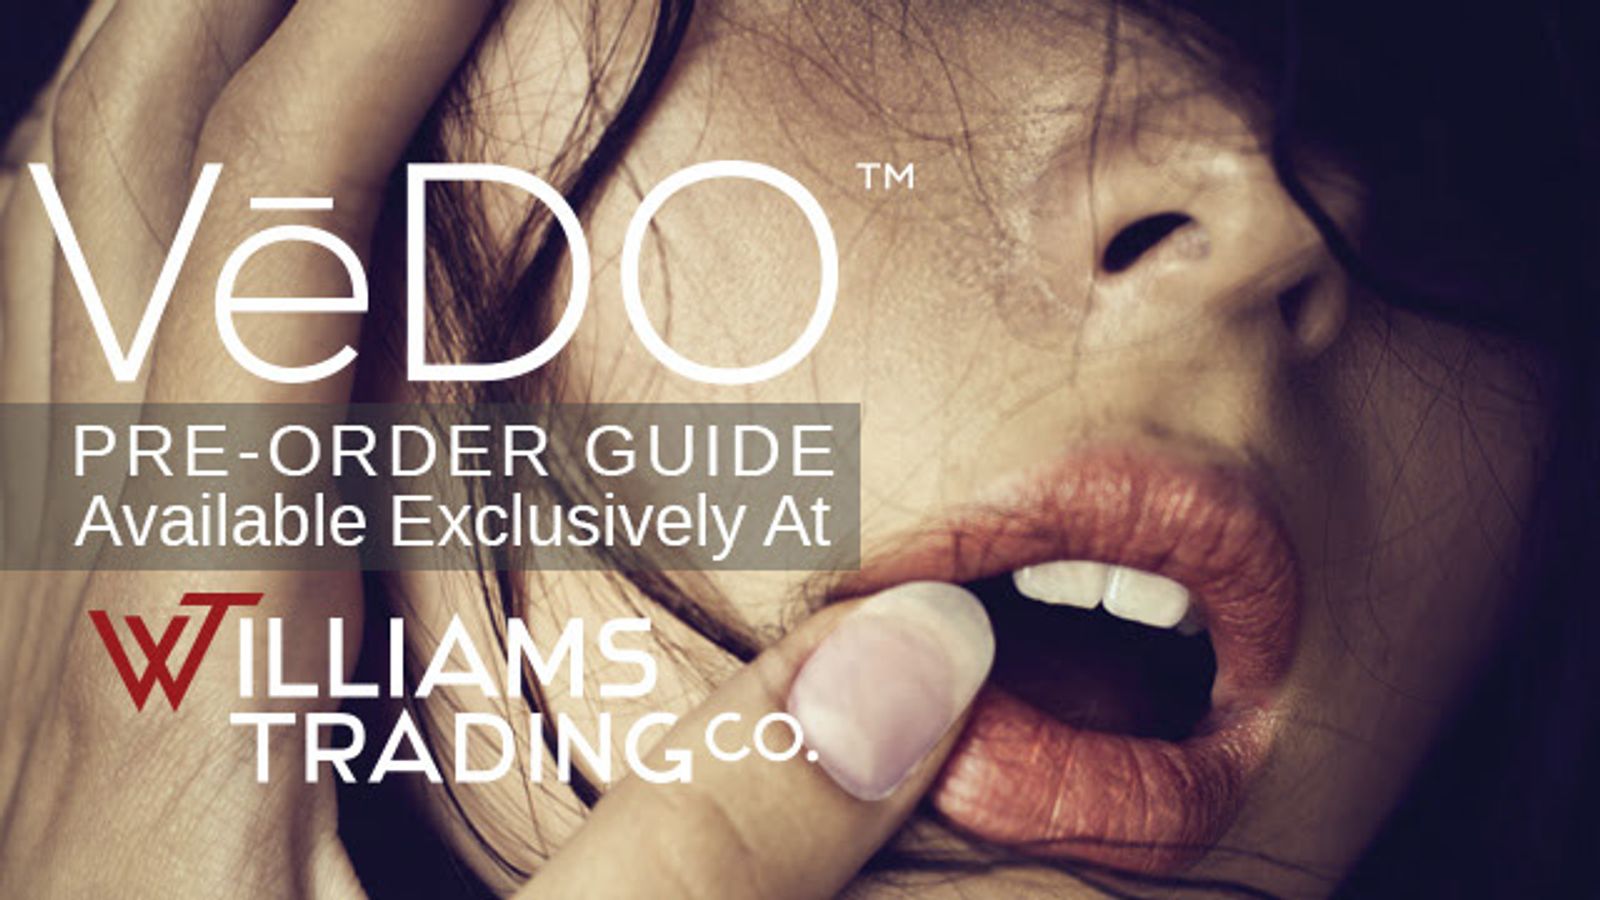 VeDO Pre-order Guide Available Exclusively At Williams Trading Co.